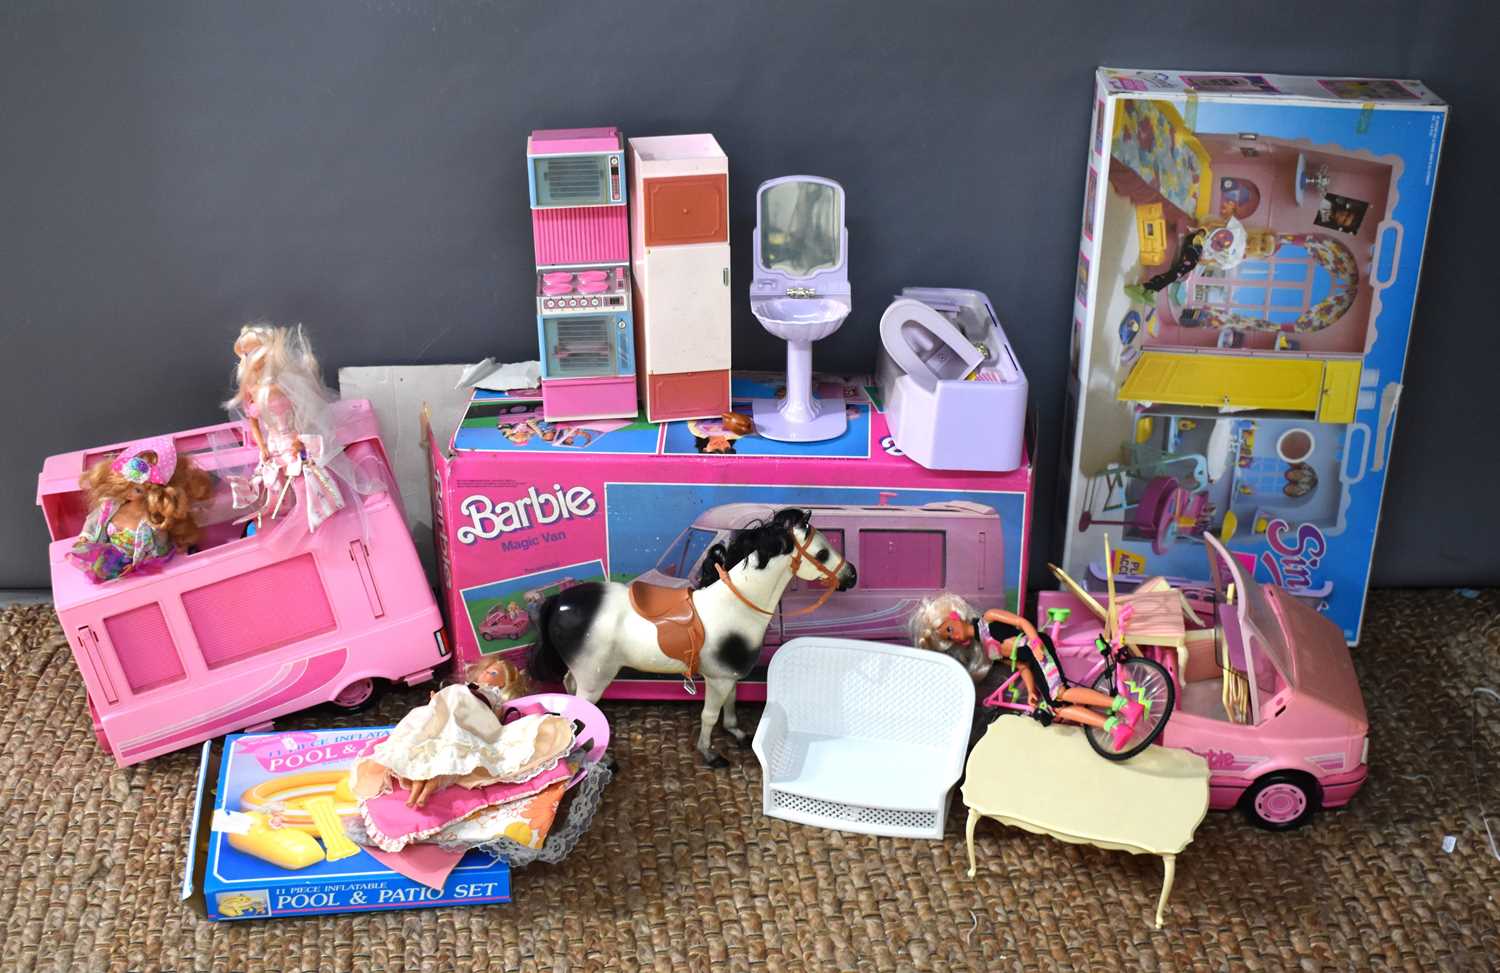 A large collection of Sindy and Barbie, dolls and accessories, including Barbie Magic Van with